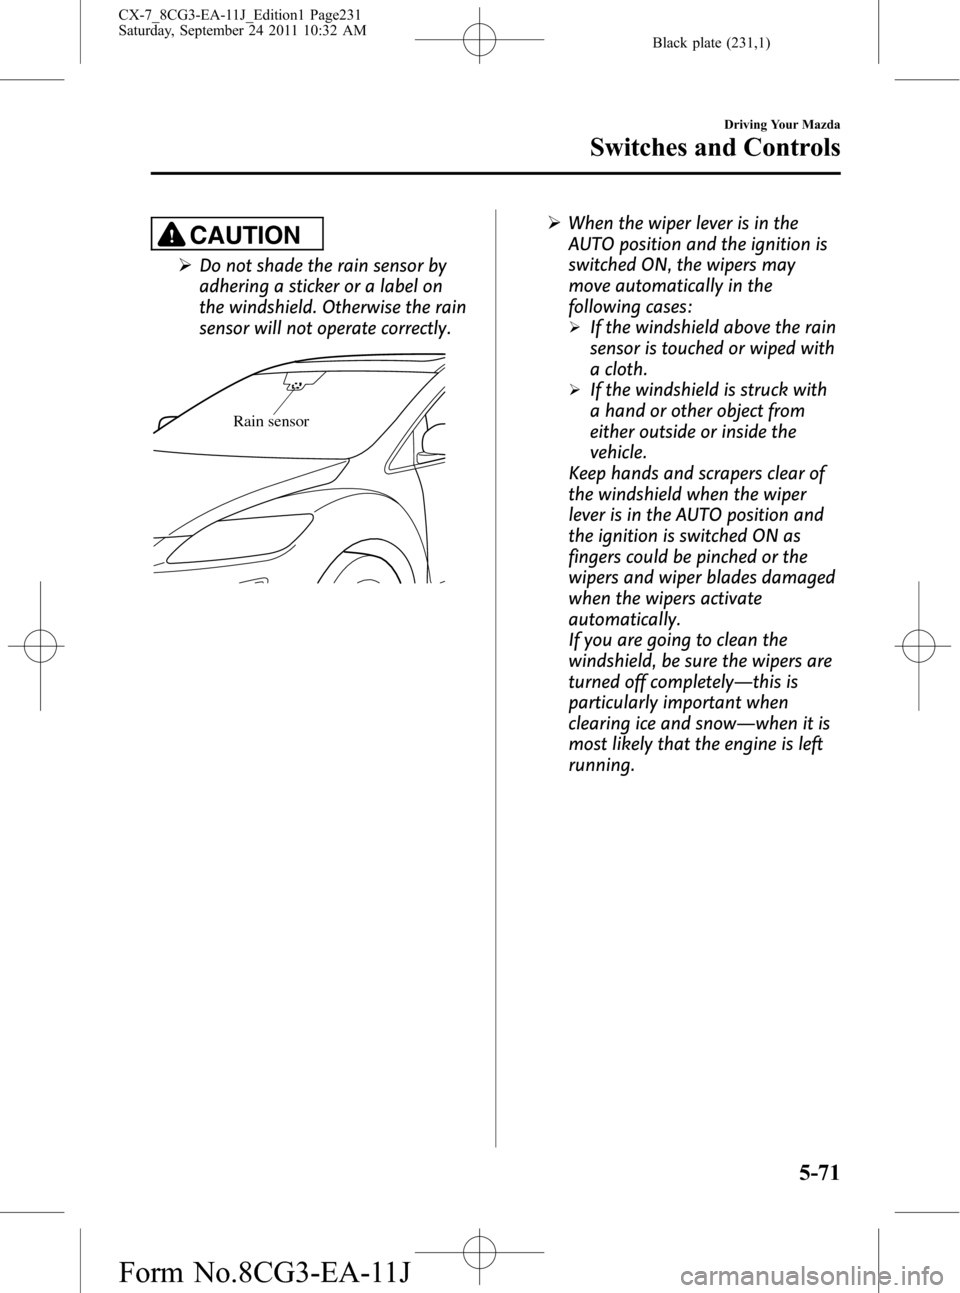 MAZDA MODEL CX-7 2012  Owners Manual (in English) Black plate (231,1)
CAUTION
ØDo not shade the rain sensor by
adhering a sticker or a label on
the windshield. Otherwise the rain
sensor will not operate correctly.
Rain sensor
ØWhen the wiper lever 